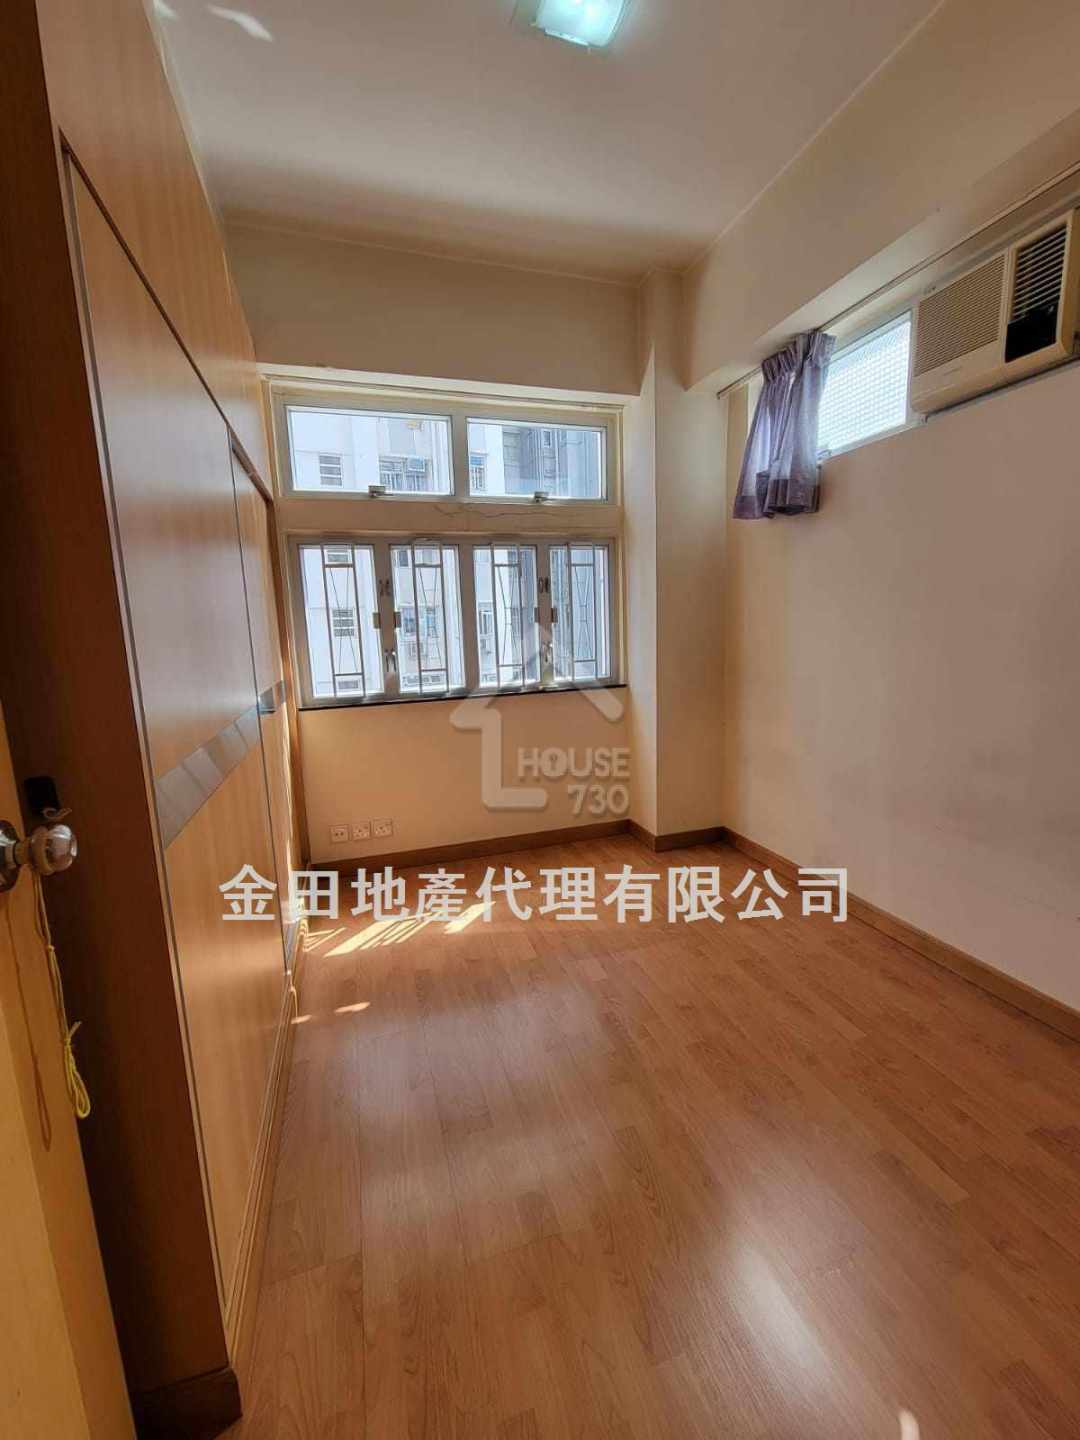 Wan Chai KWONG SANG HONG BUILDING Middle Floor Bedroom 1 House730-6282601